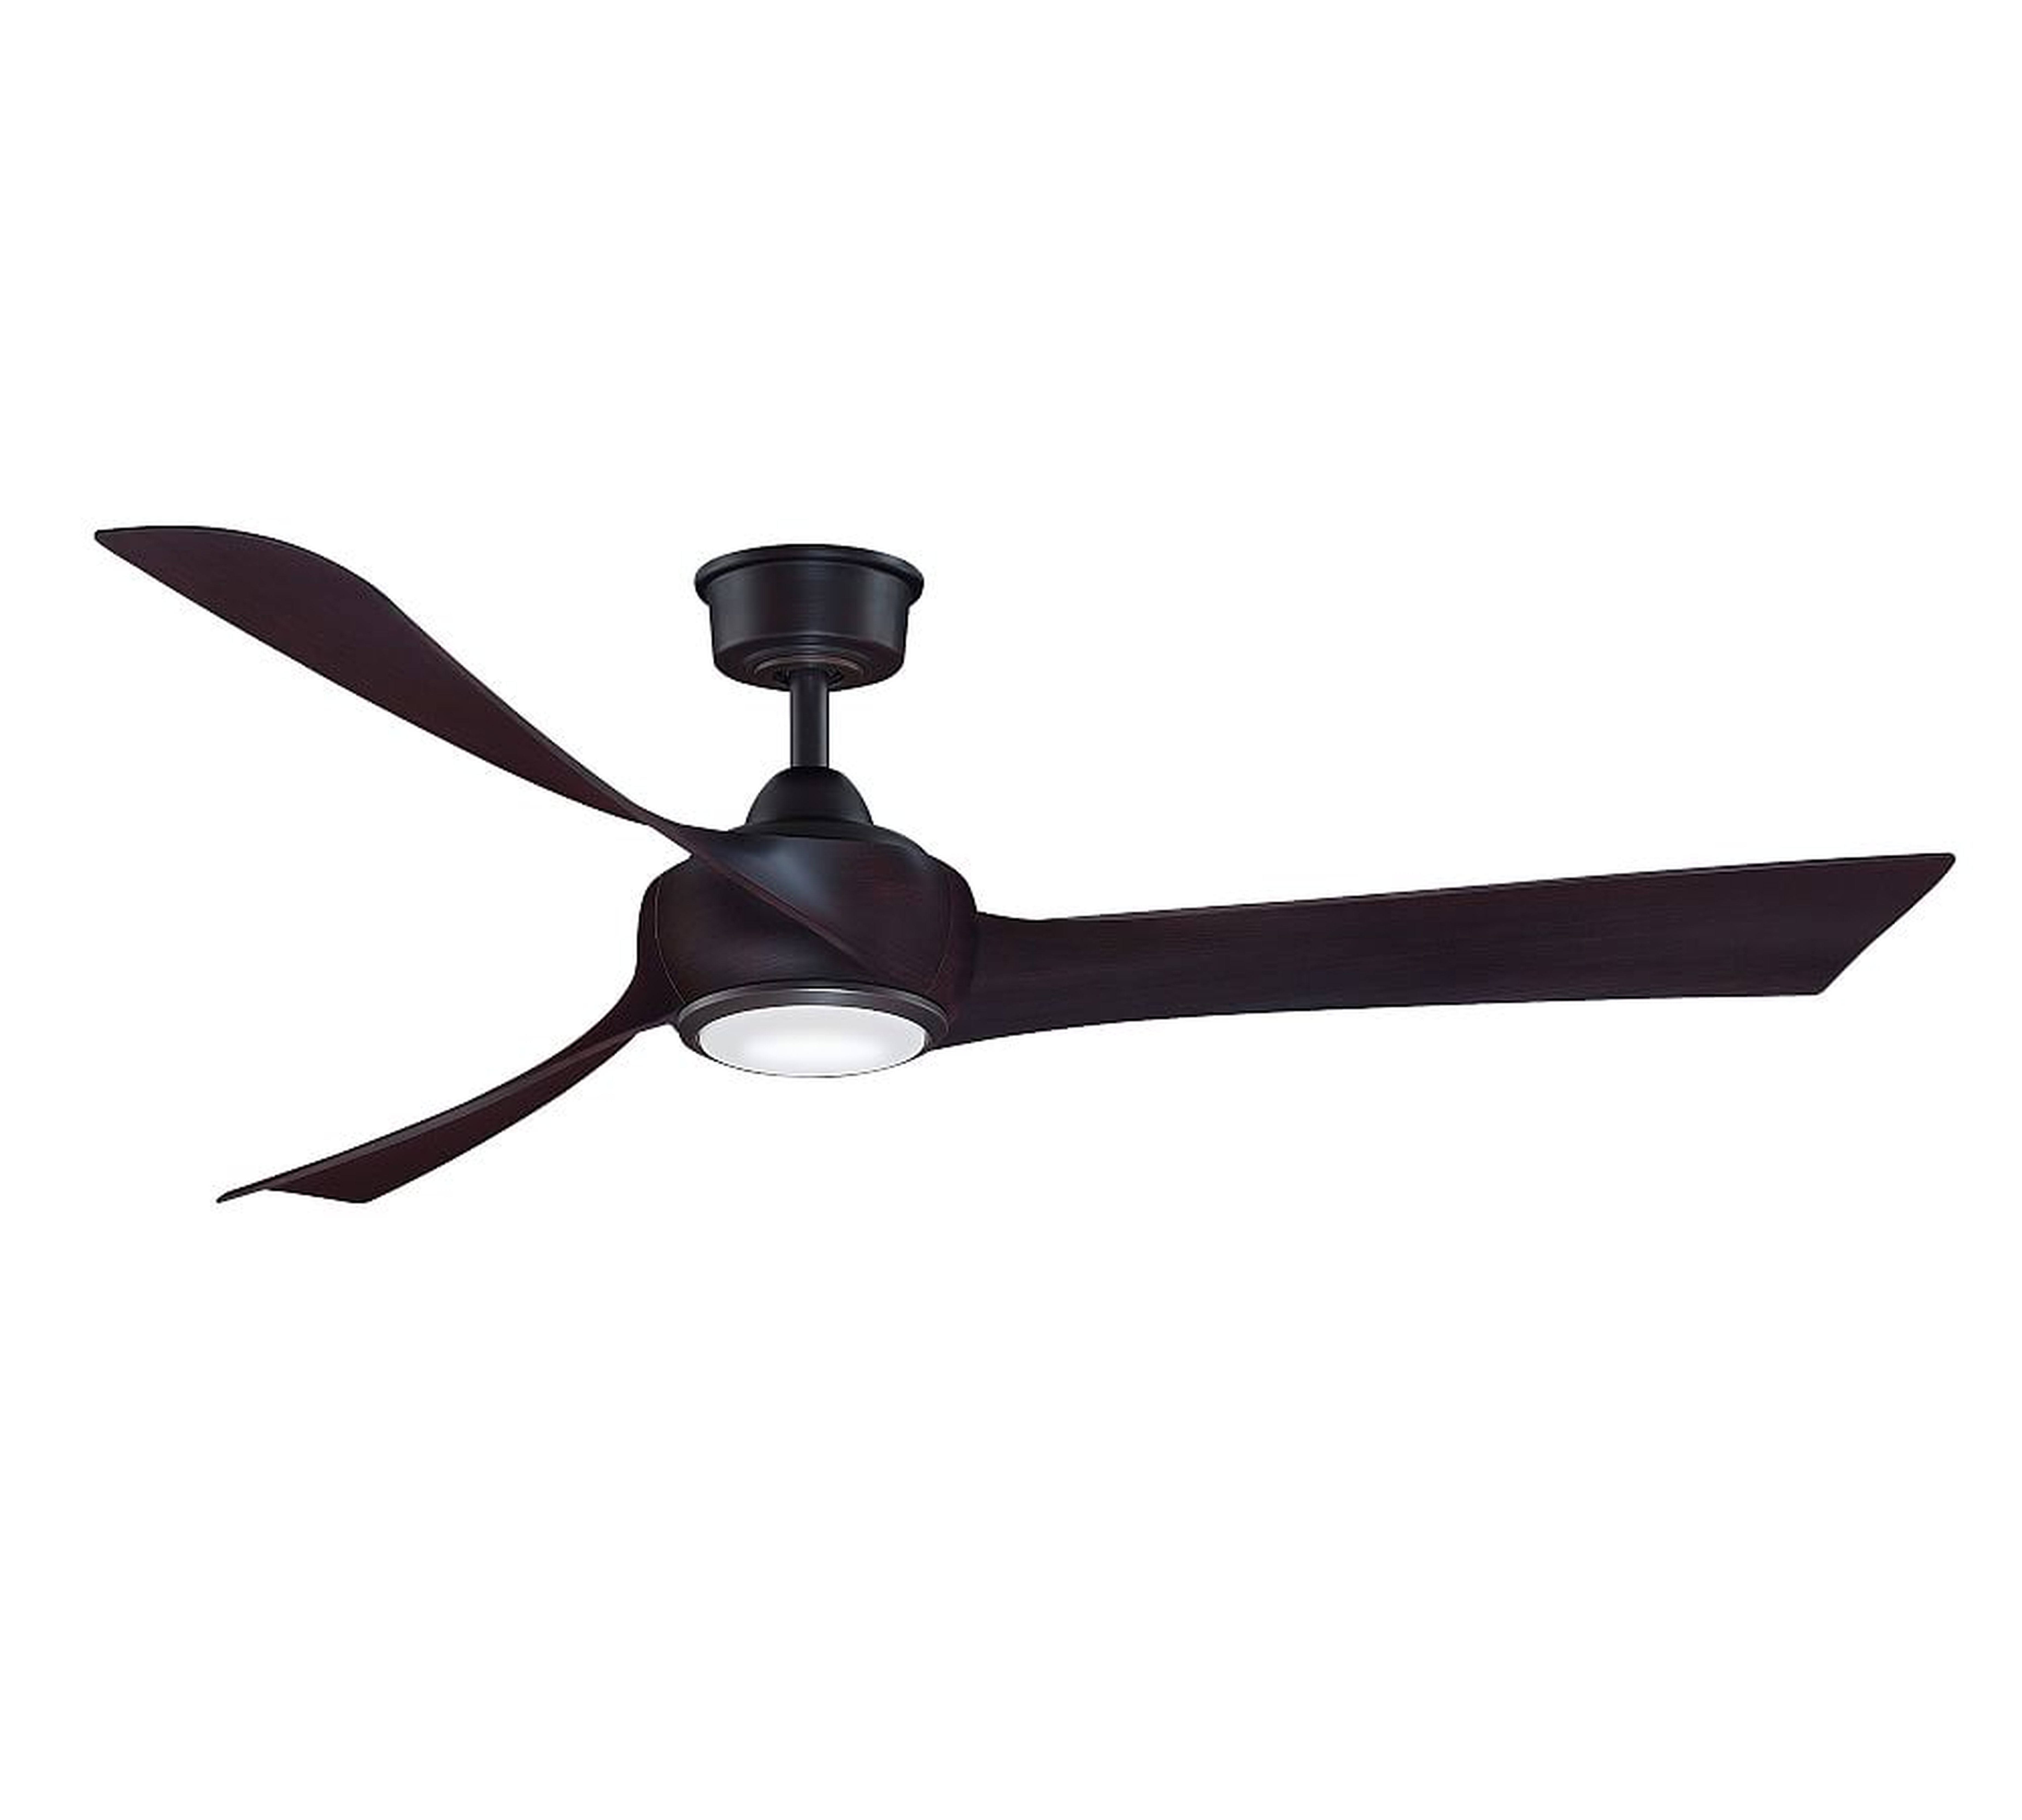 Wrap 60" Indoor/Outdoor Ceiling Fan With Led Light Kit, Dark Bronze With Dark Walnut Blades - Pottery Barn